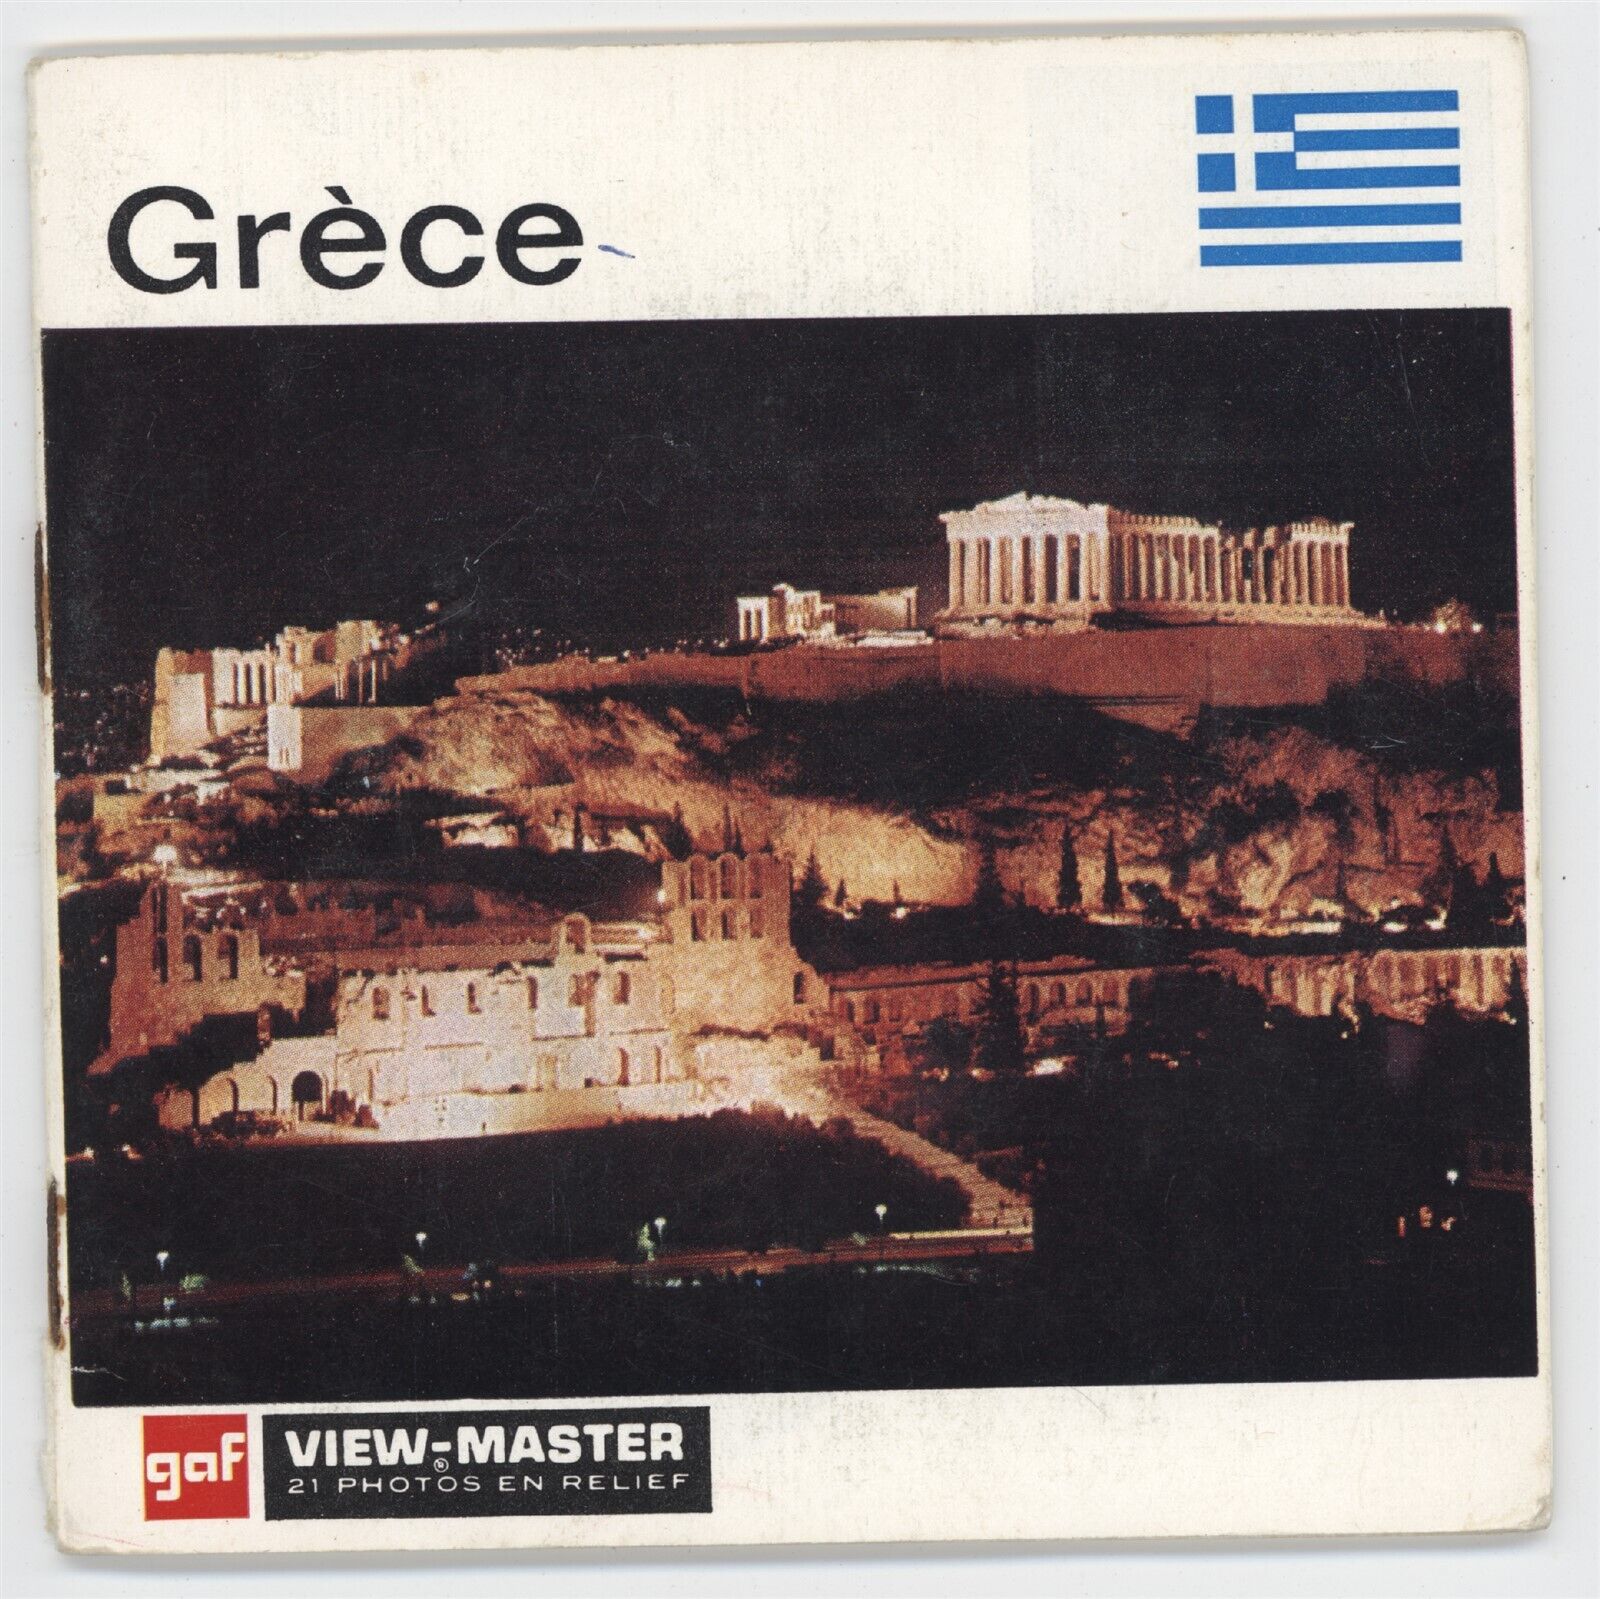 Viewmaster Greece Grece C020-F Nations of the World packet-book 